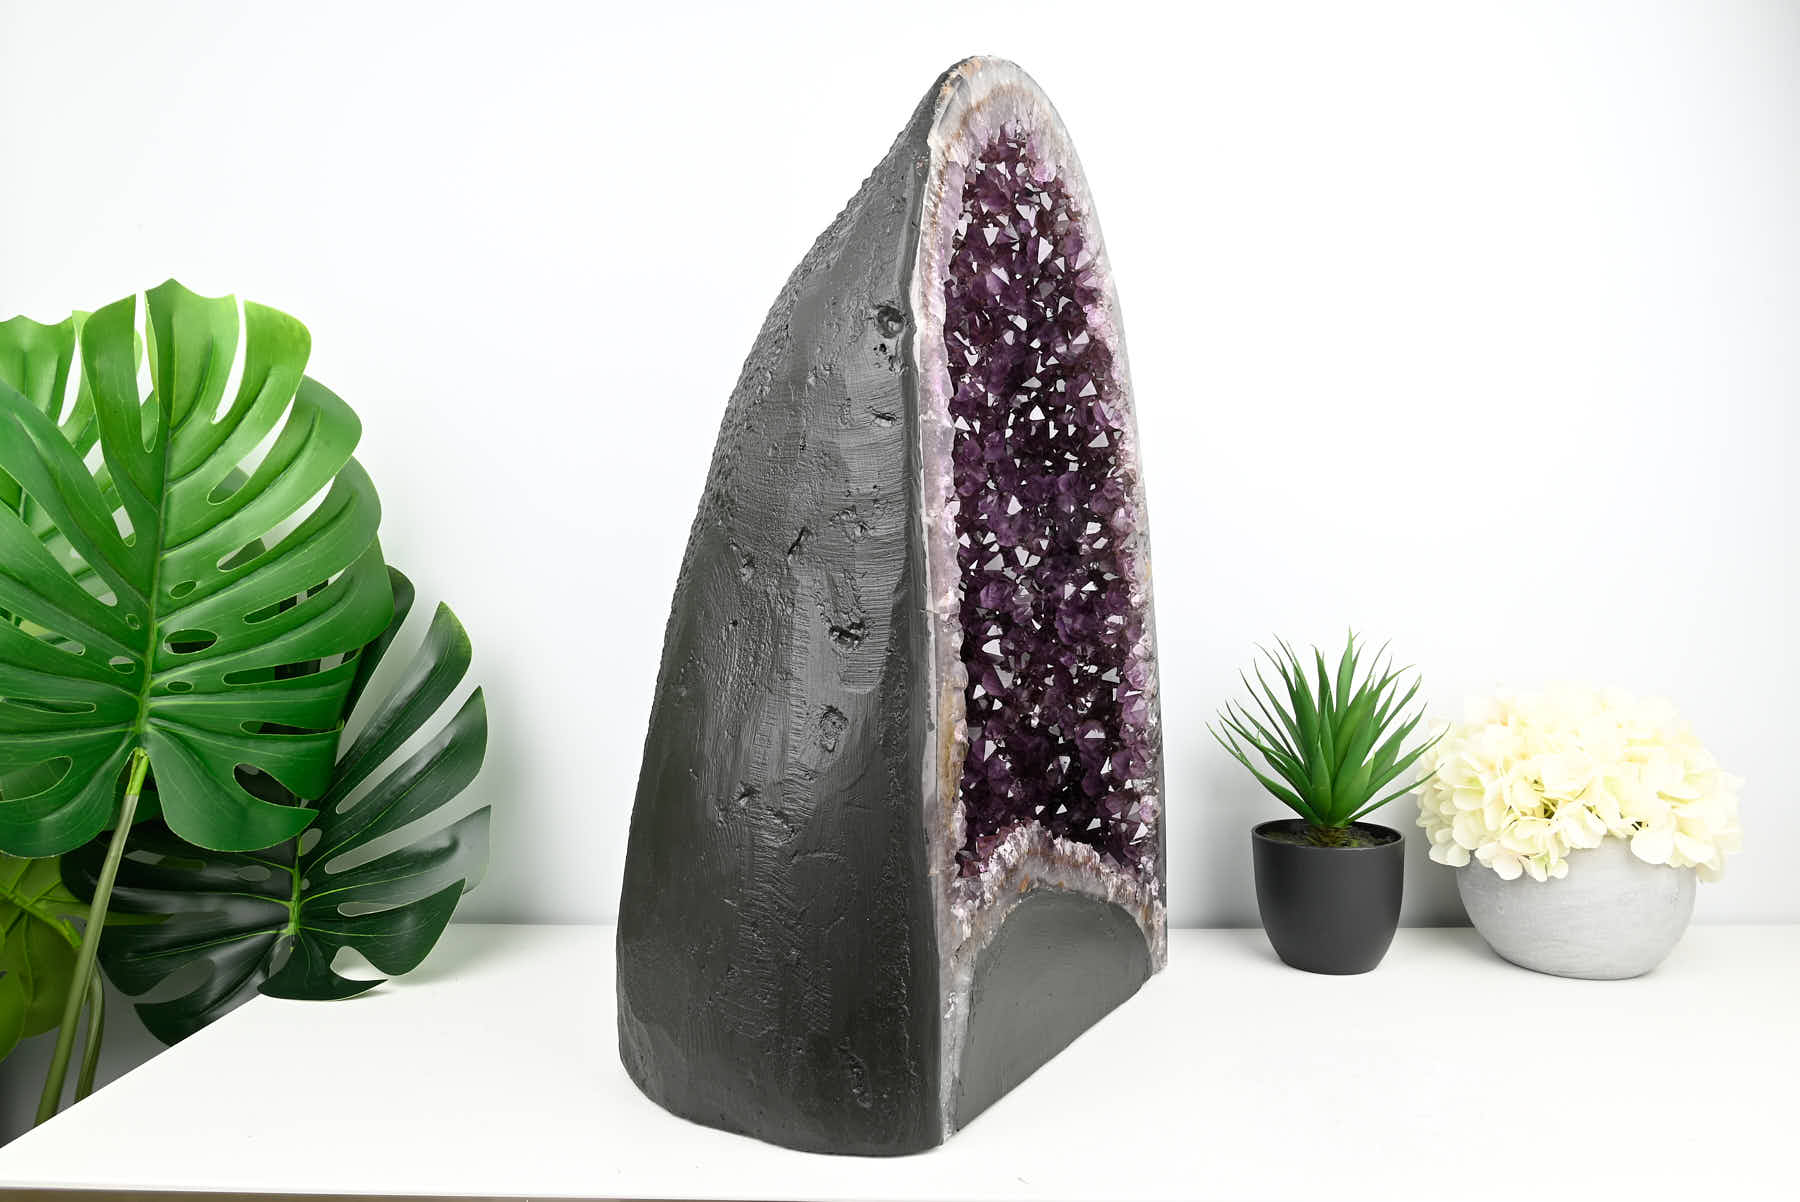 Extra Quality Amethyst Cathedral - 35.66kg, 53cm tall - #CAAMET-10047